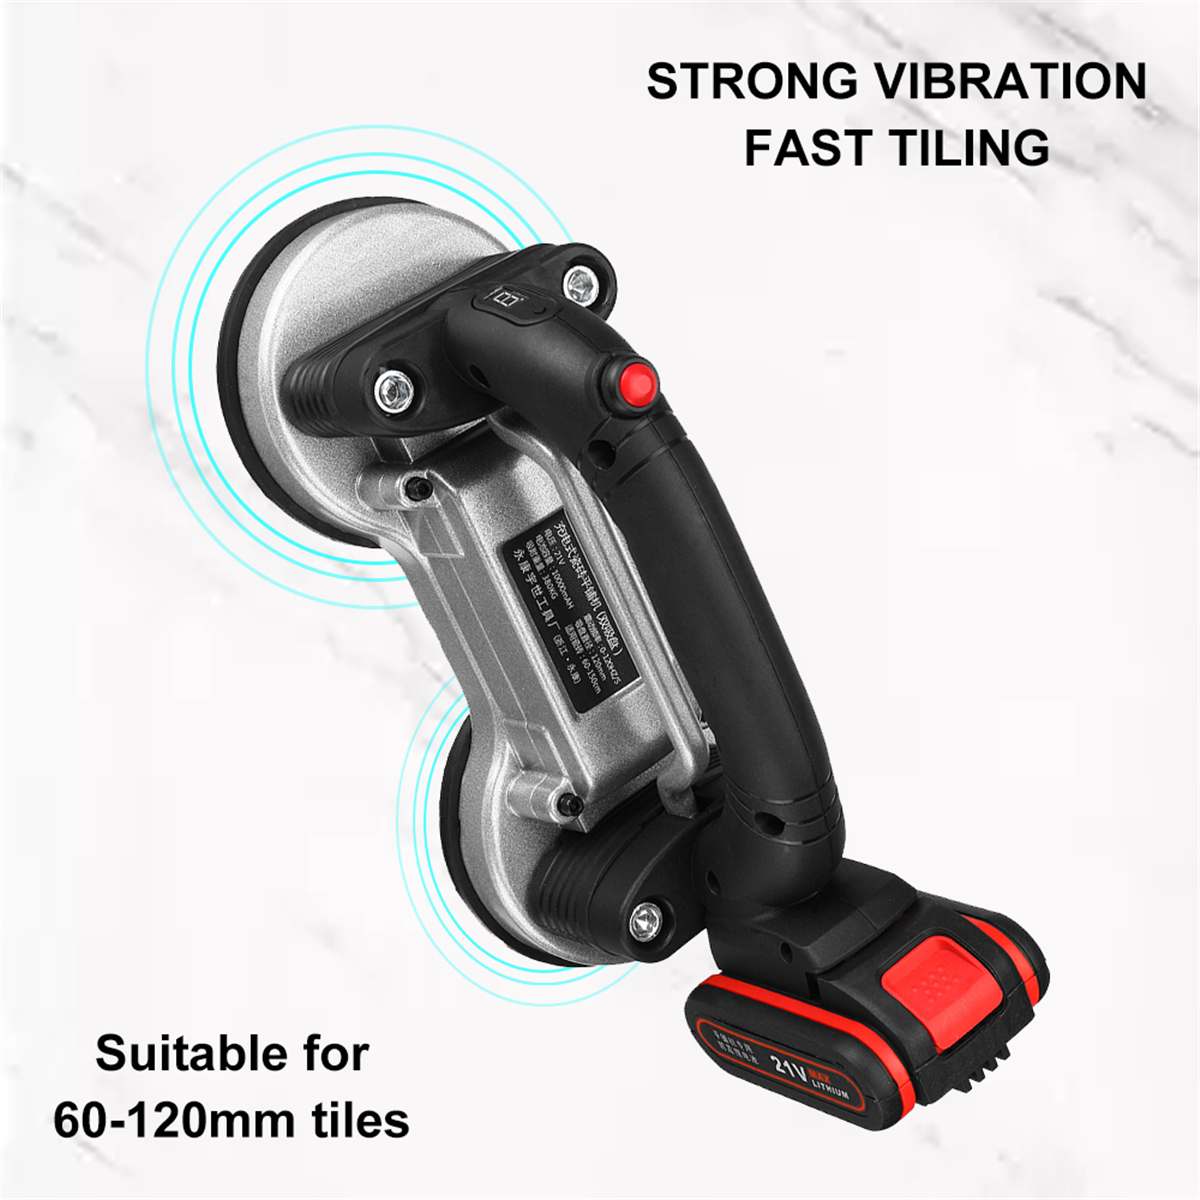 Tiling Tiles Machine 60-120mm Tile Vibrator Suction Cup Adjustable Automatic Floor Vibrator Leveling Tool With Battery 110V-220V